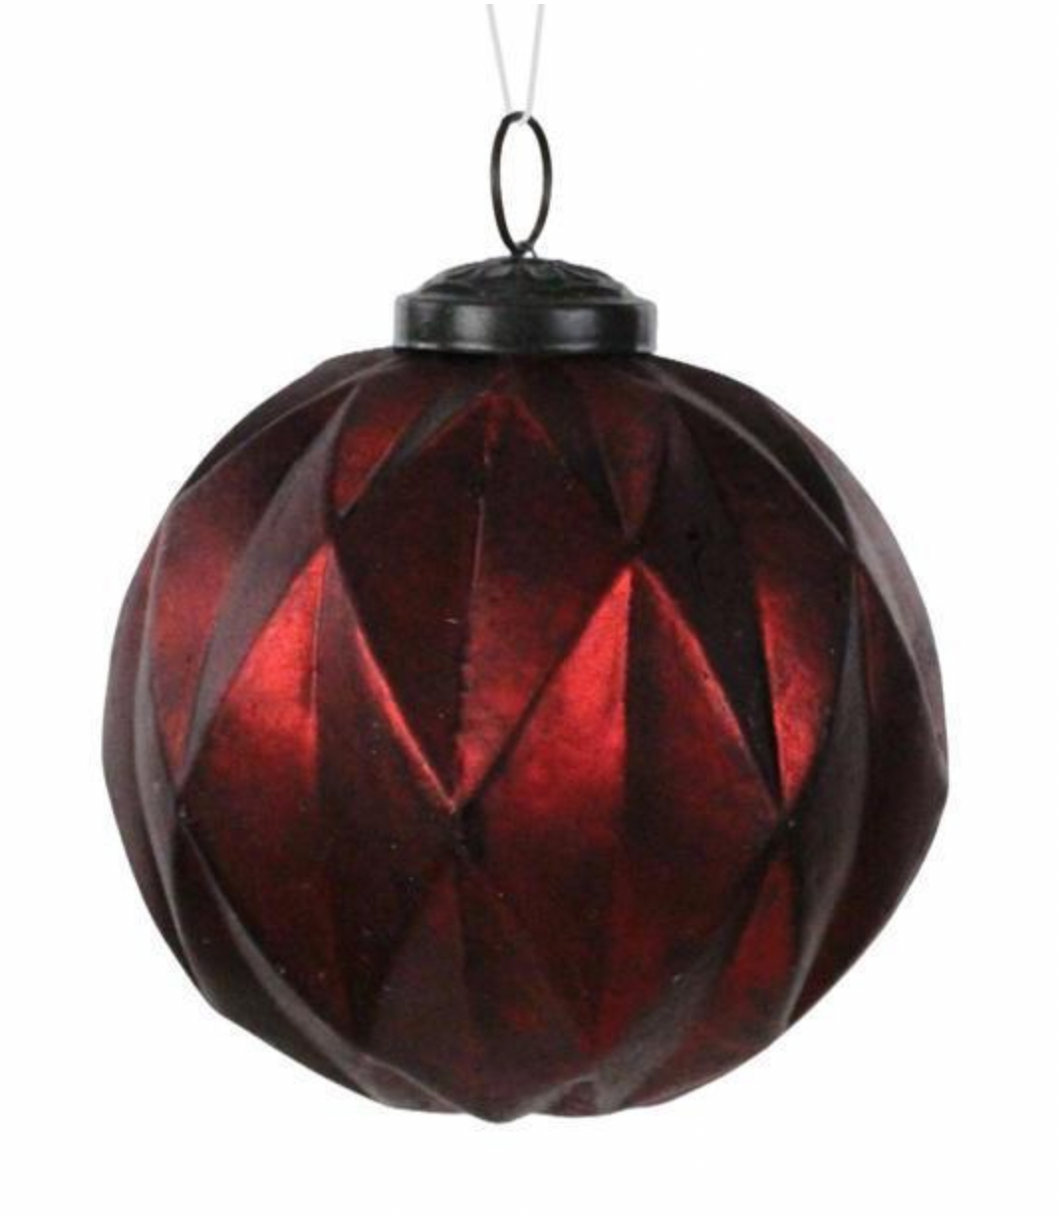 Antique Red Glass Ornament